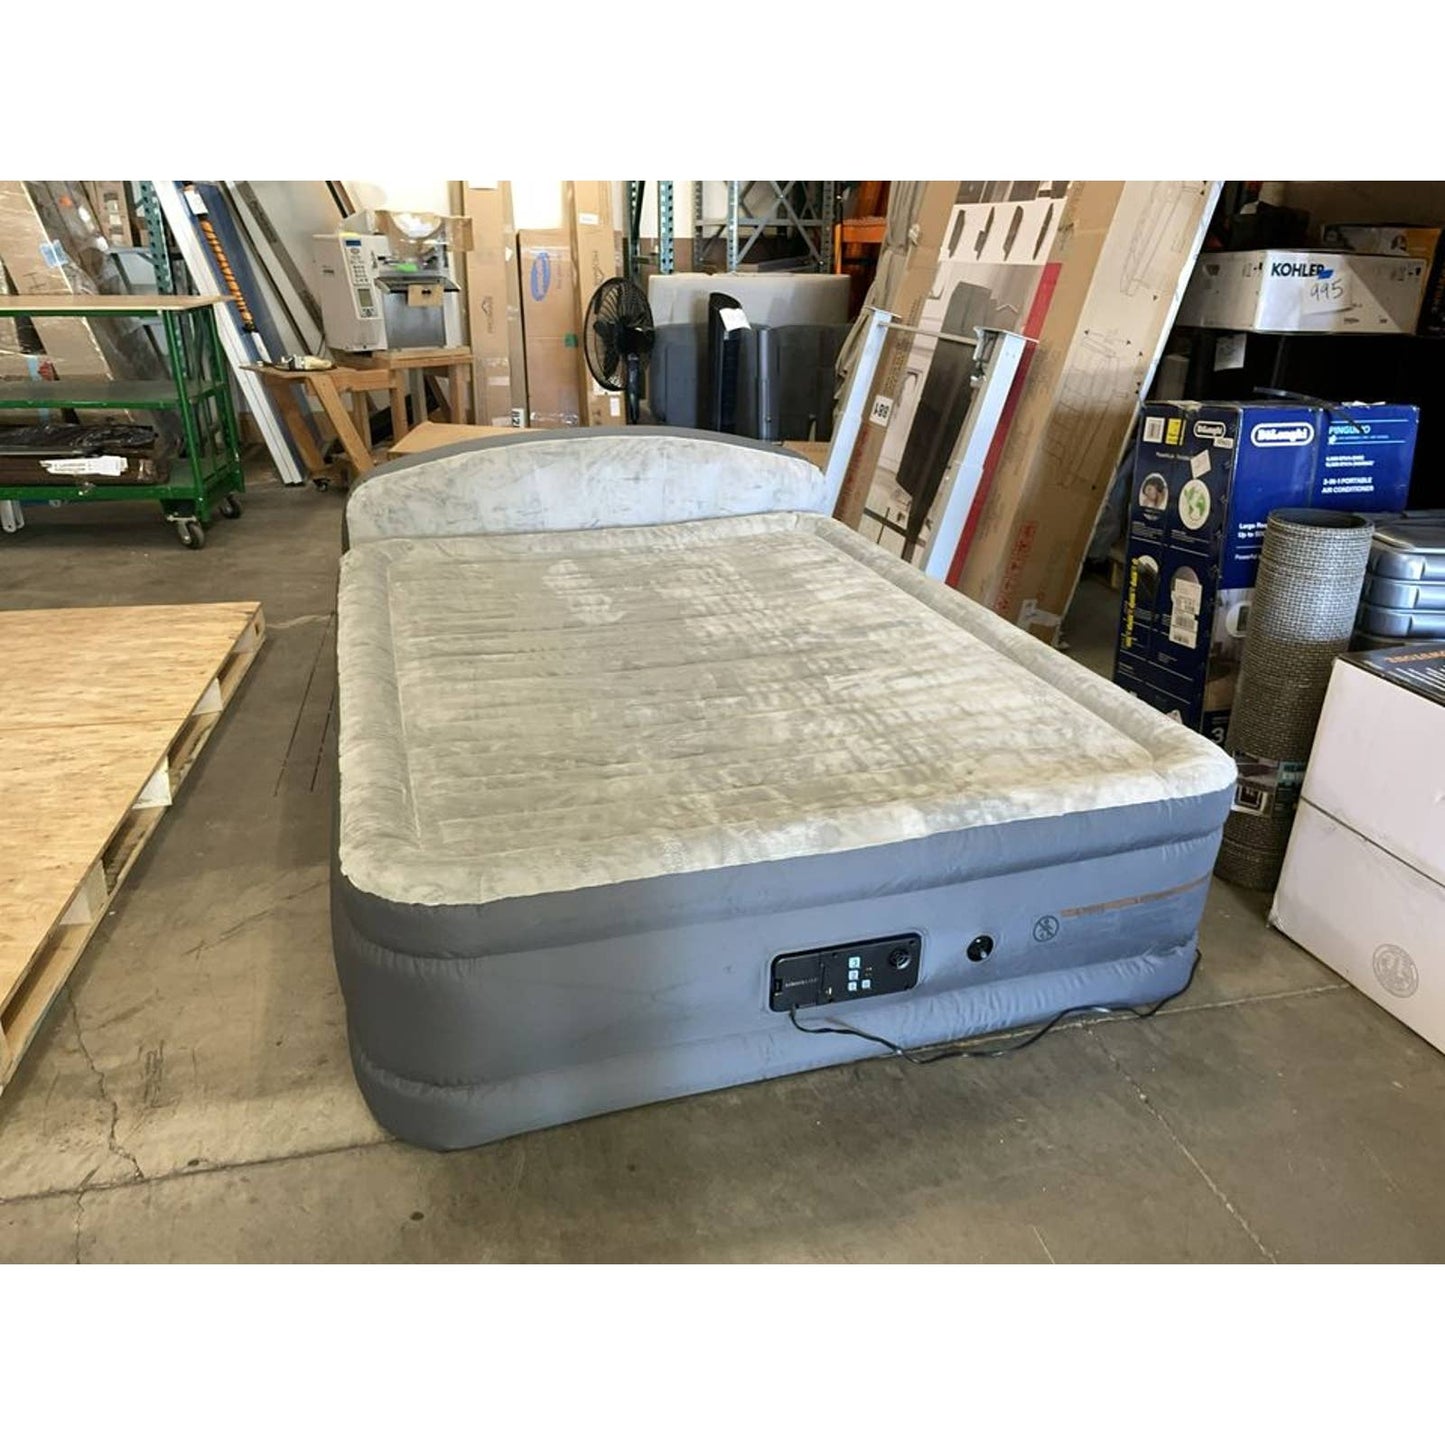 Like NEW - Costco - Sealy AlwayzAire Tough Guard Air Mattress, Queen - Retail $169